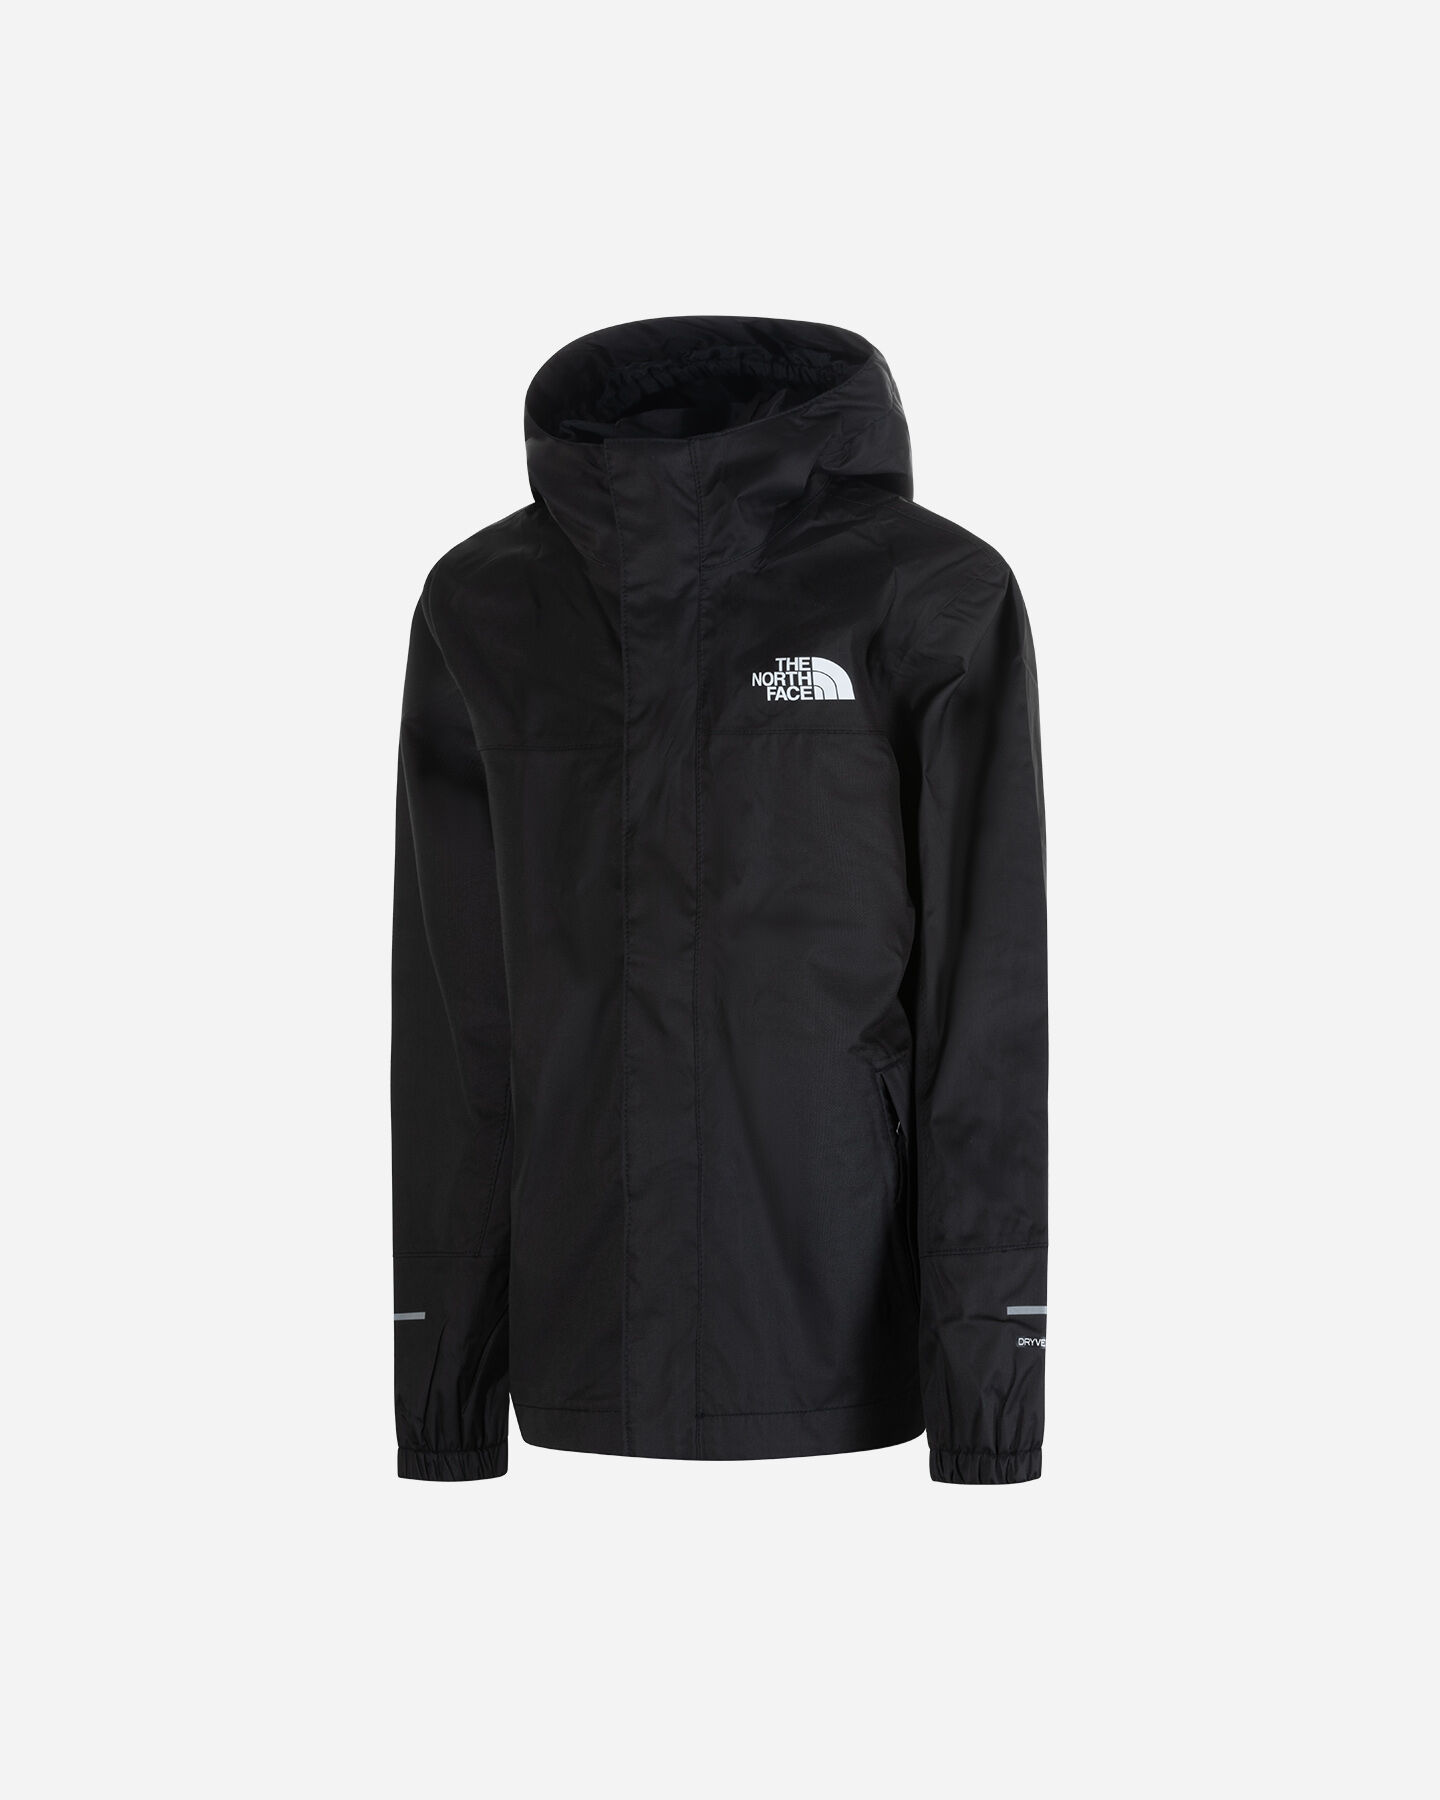  Giacca outdoor THE NORTH FACE ANTORA JR S5537465|JK3|M scatto 0